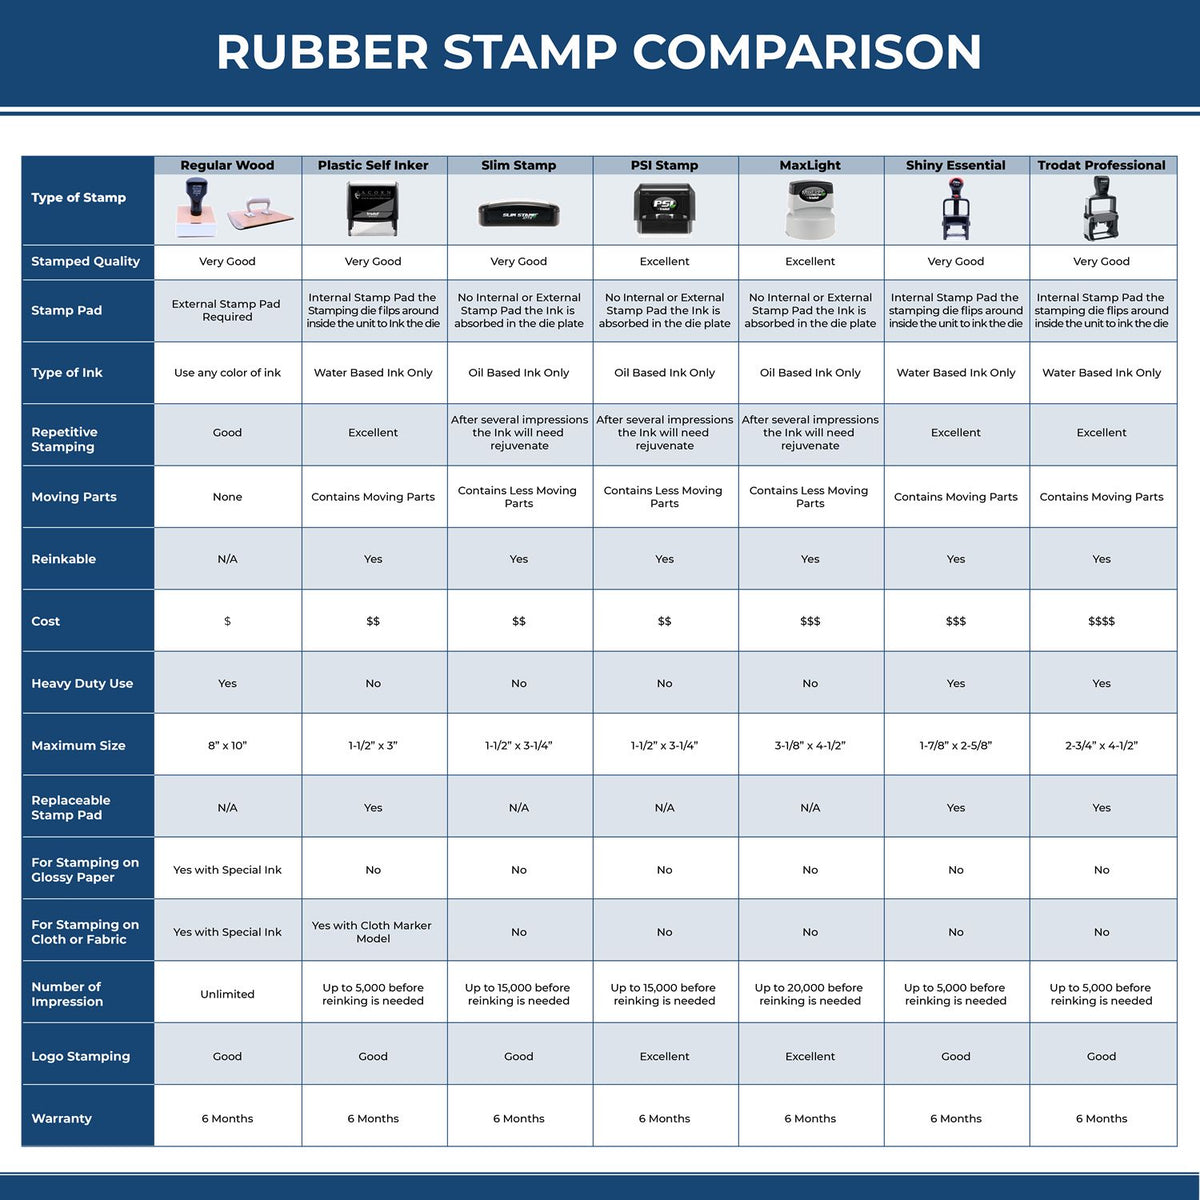 Large Self Inking Advance Directive Stamp 4528S Rubber Stamp Comparison